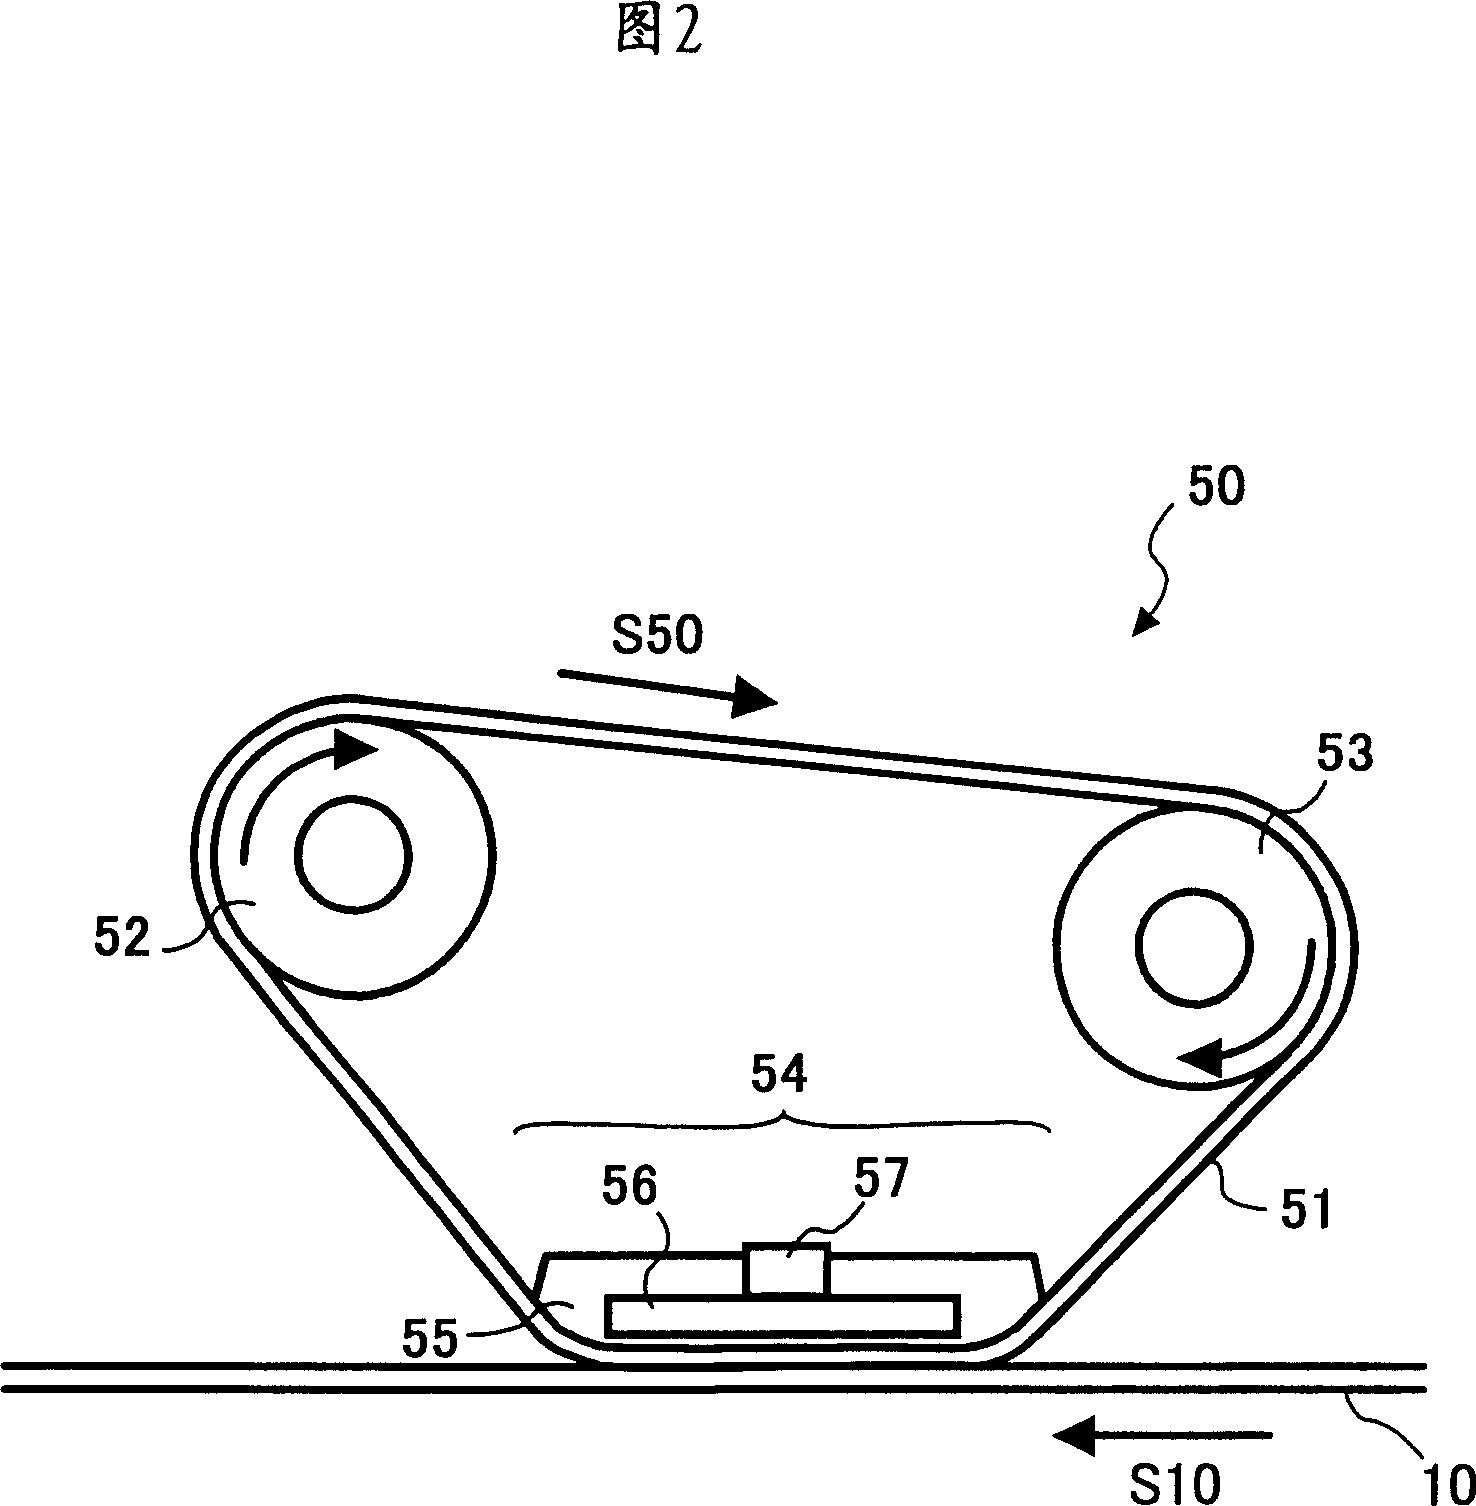 Image forming method and device